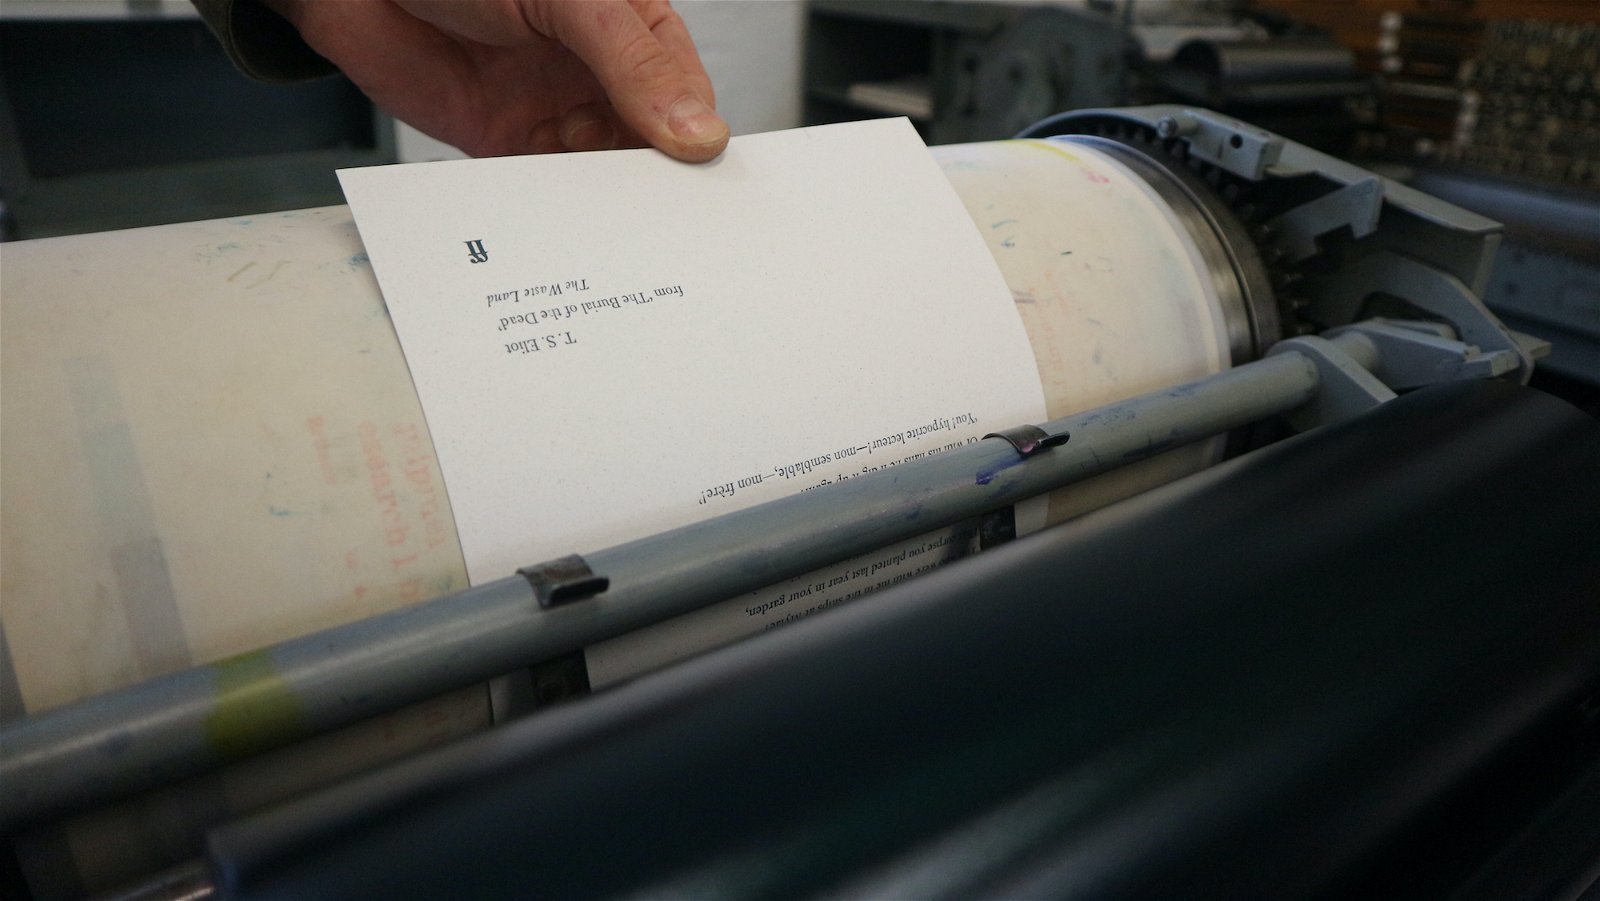 Letterpress Papers: an overview of the best papers for letterpress printing